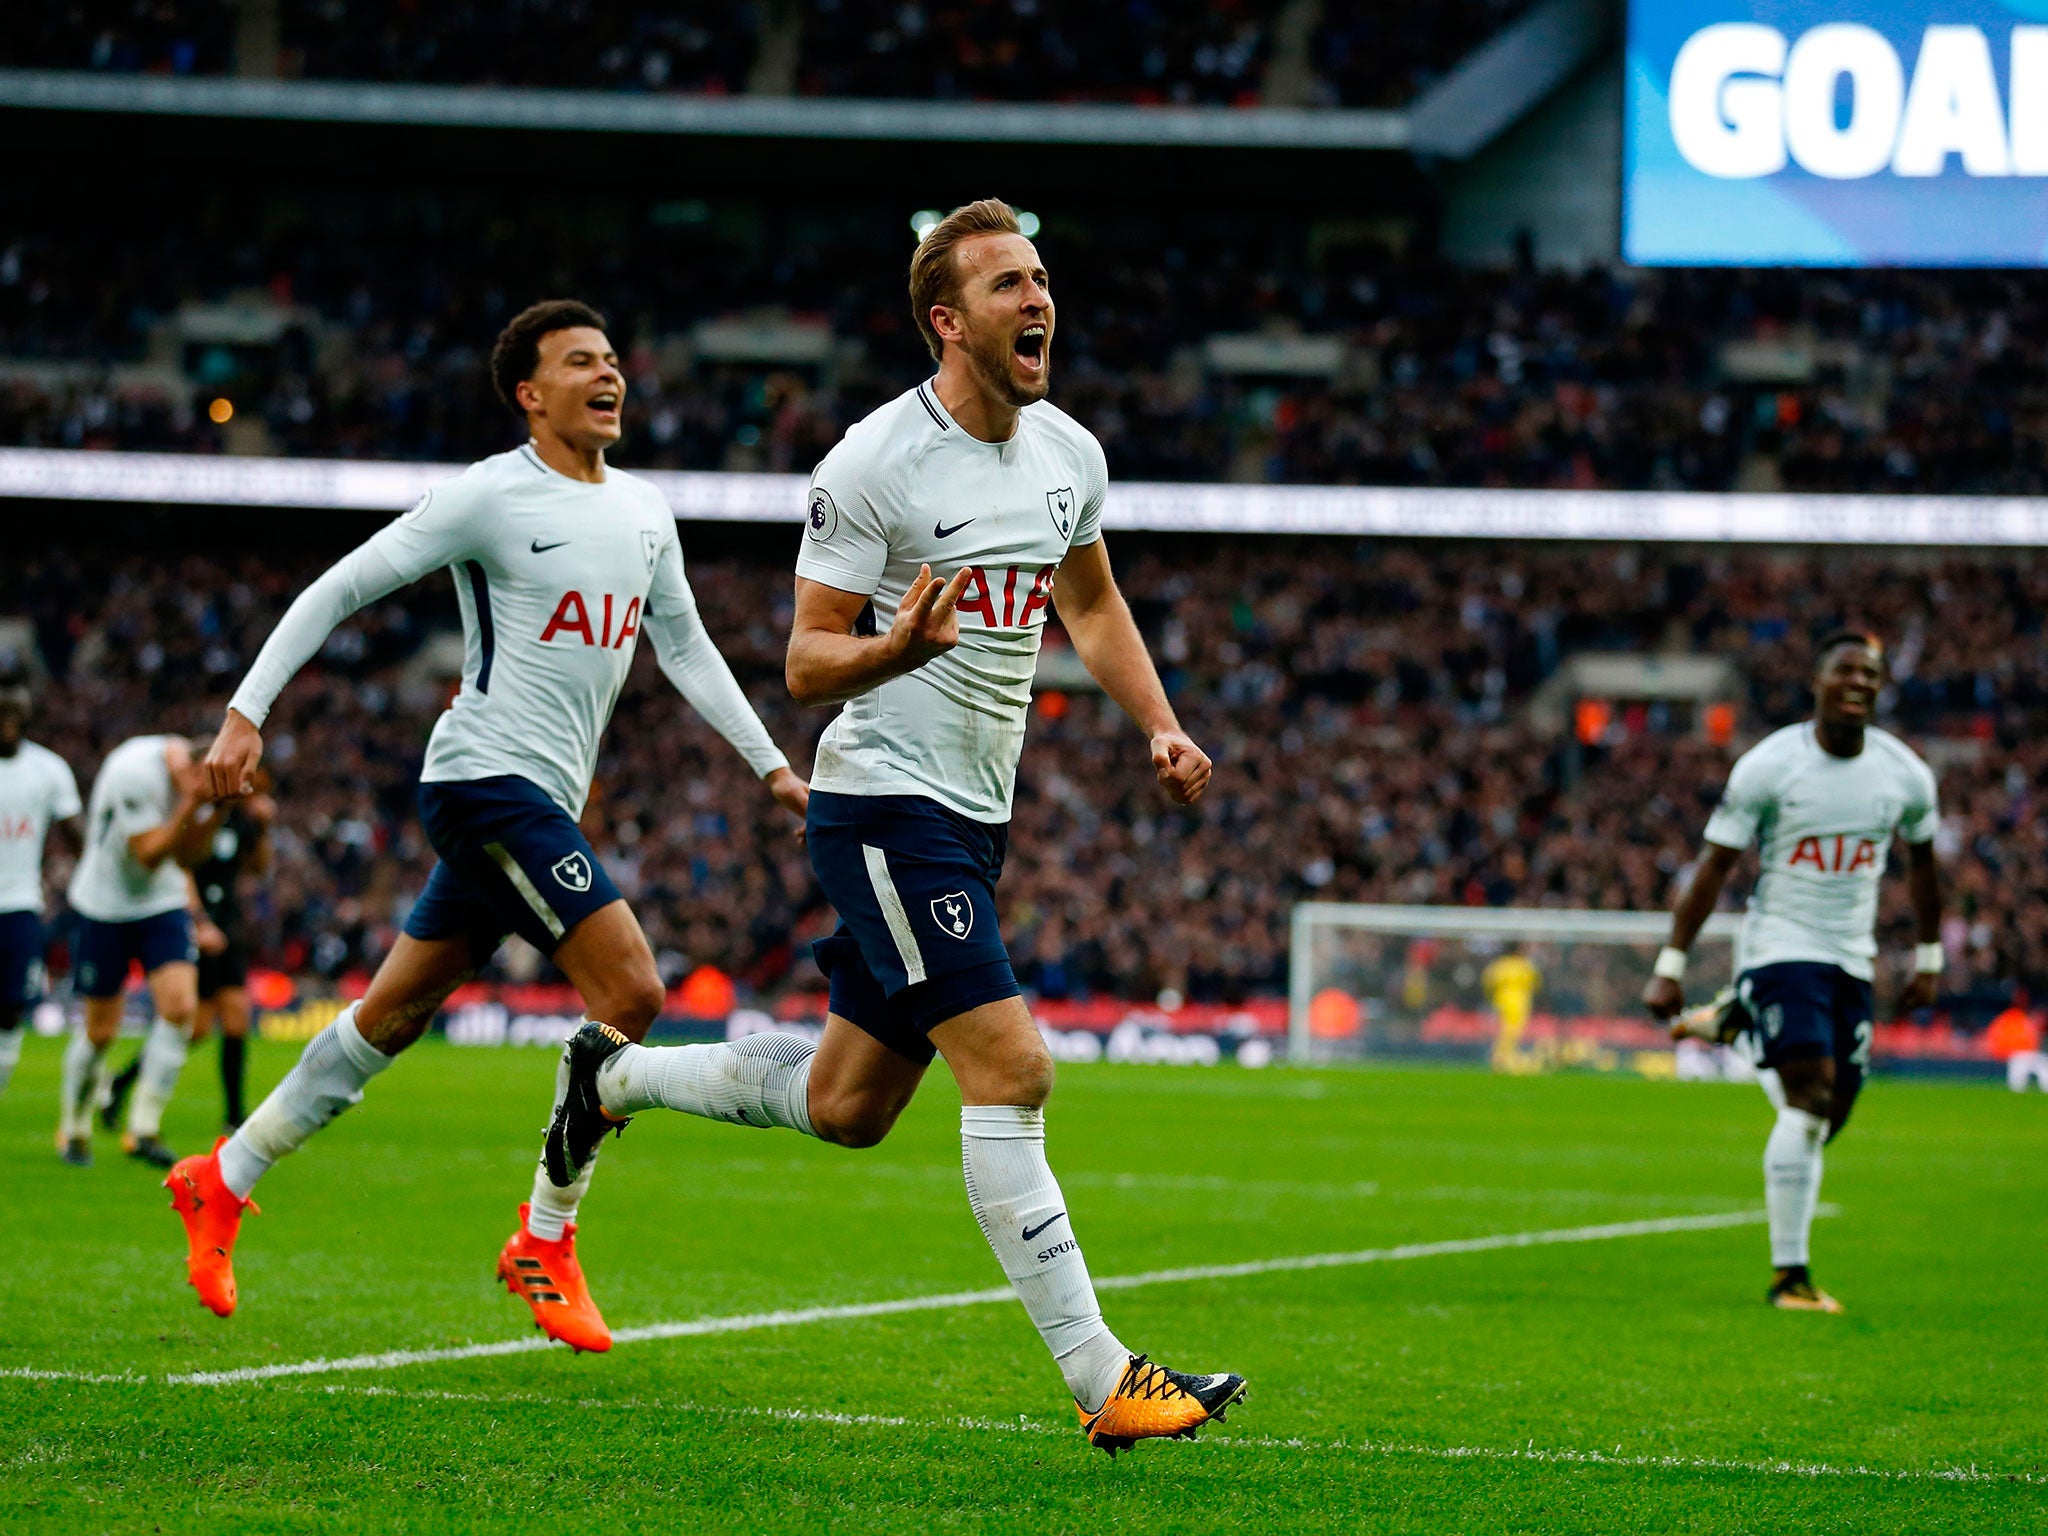 Harry Kane was on form once again for Tottenham